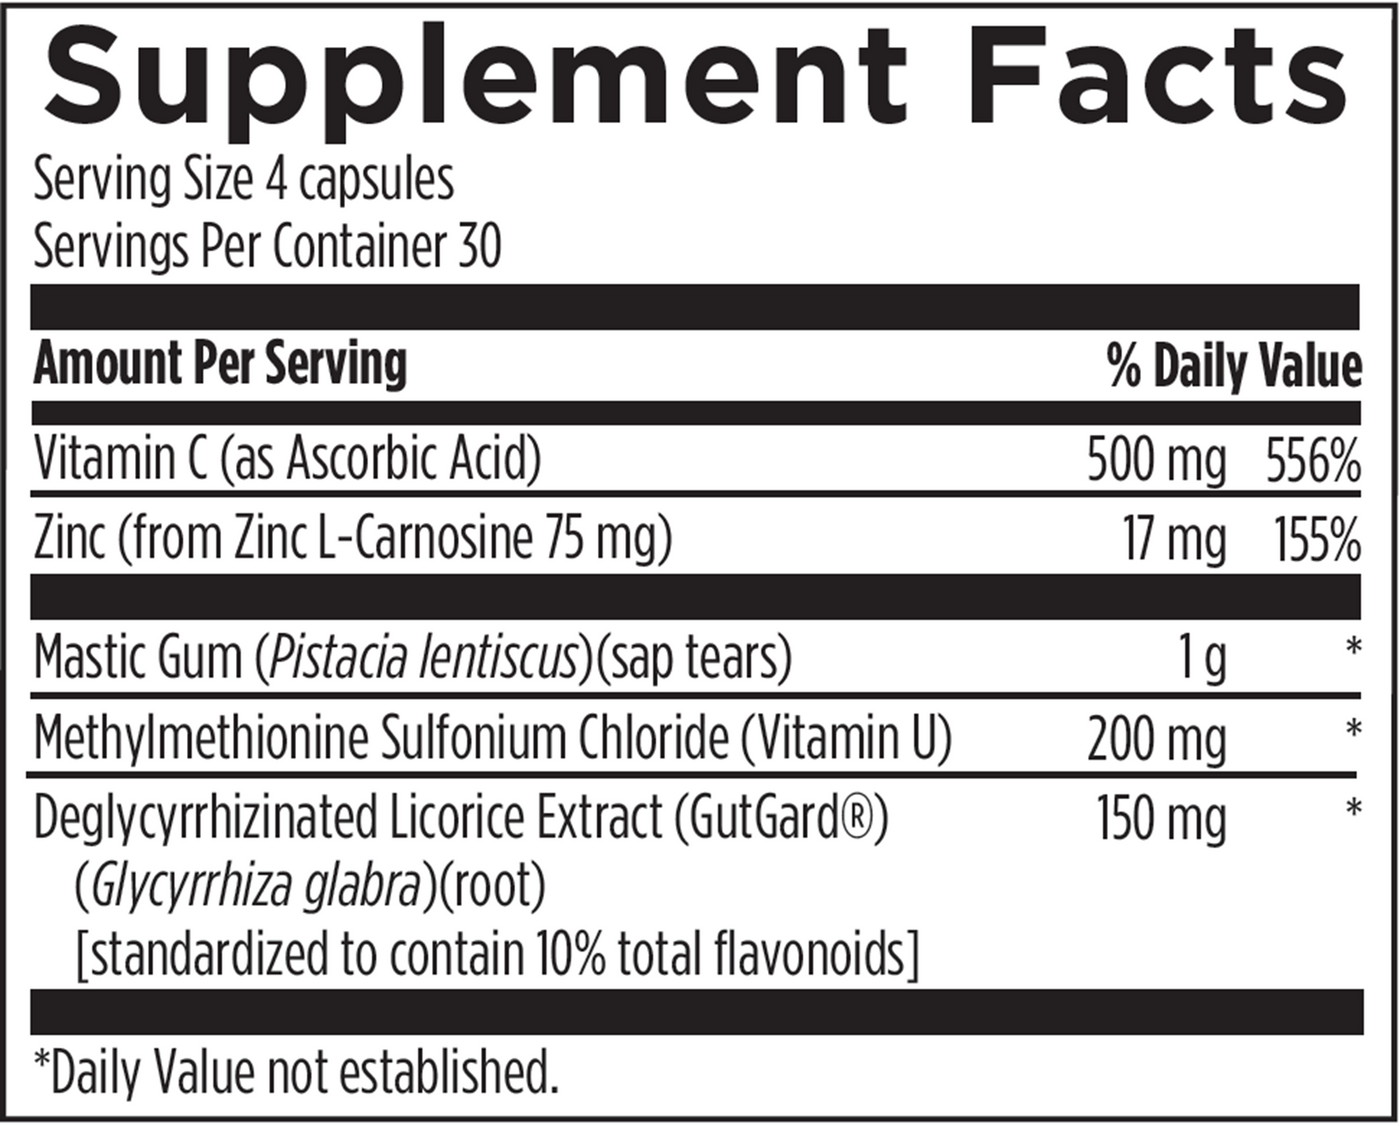 GastroMend-HP 60 vcaps Curated Wellness